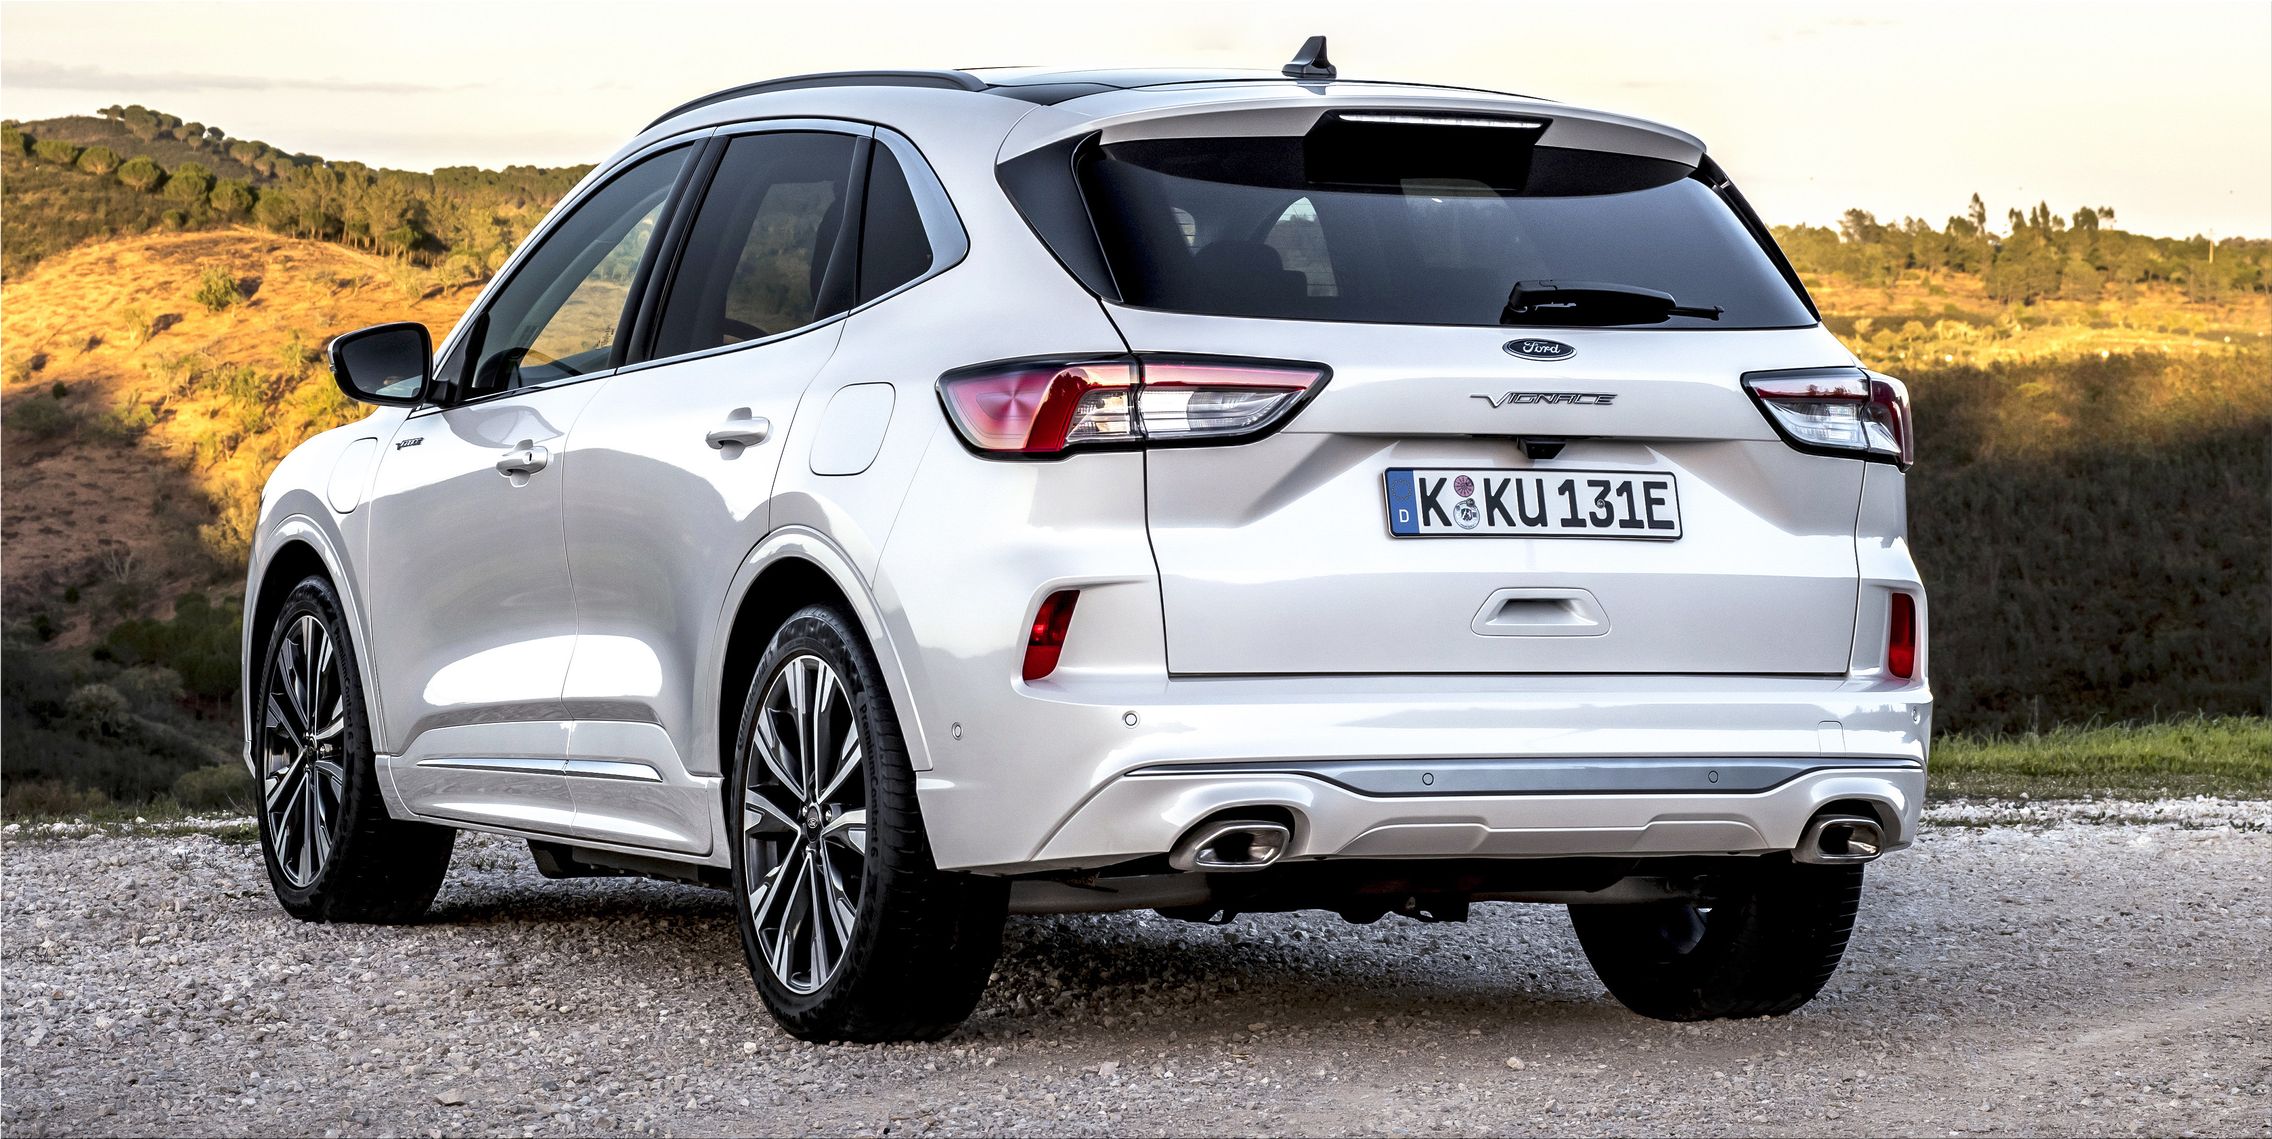 Ford Kuga Plug-In Hybrid: prices, range and standard characteristics|Ford